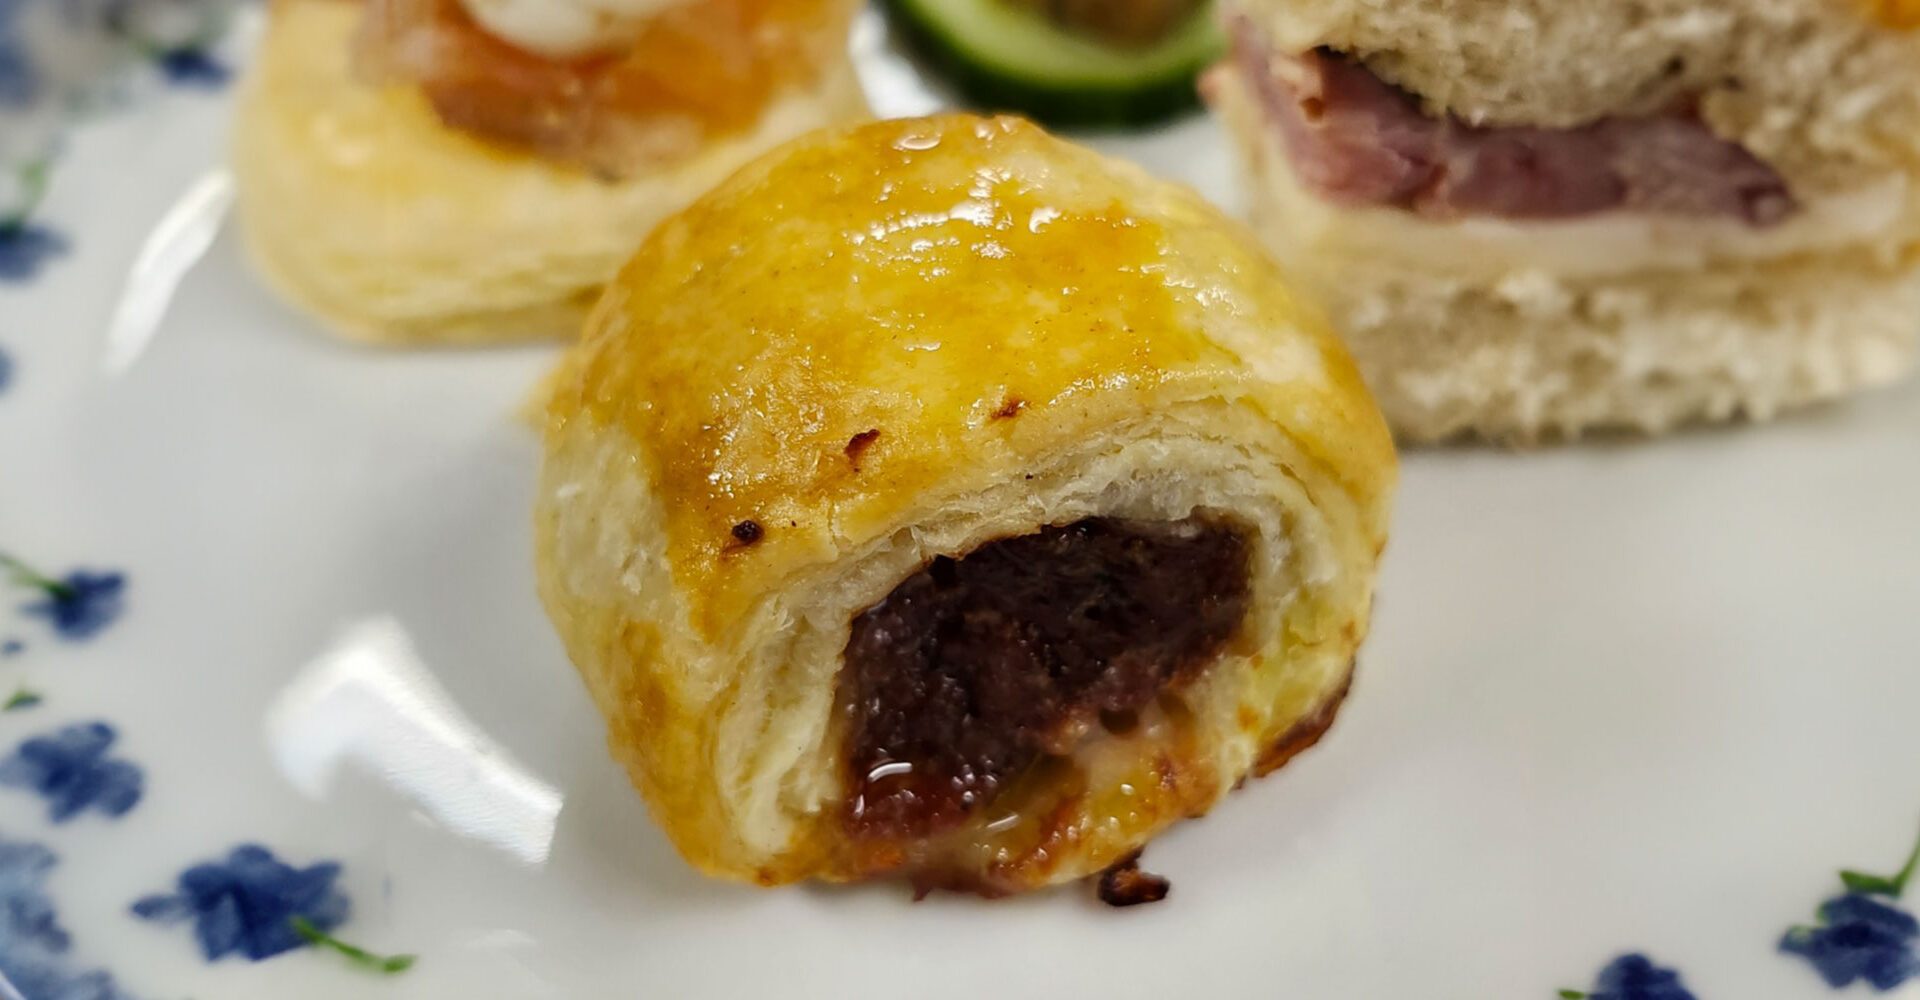 Pork and Beef Sausage Roll